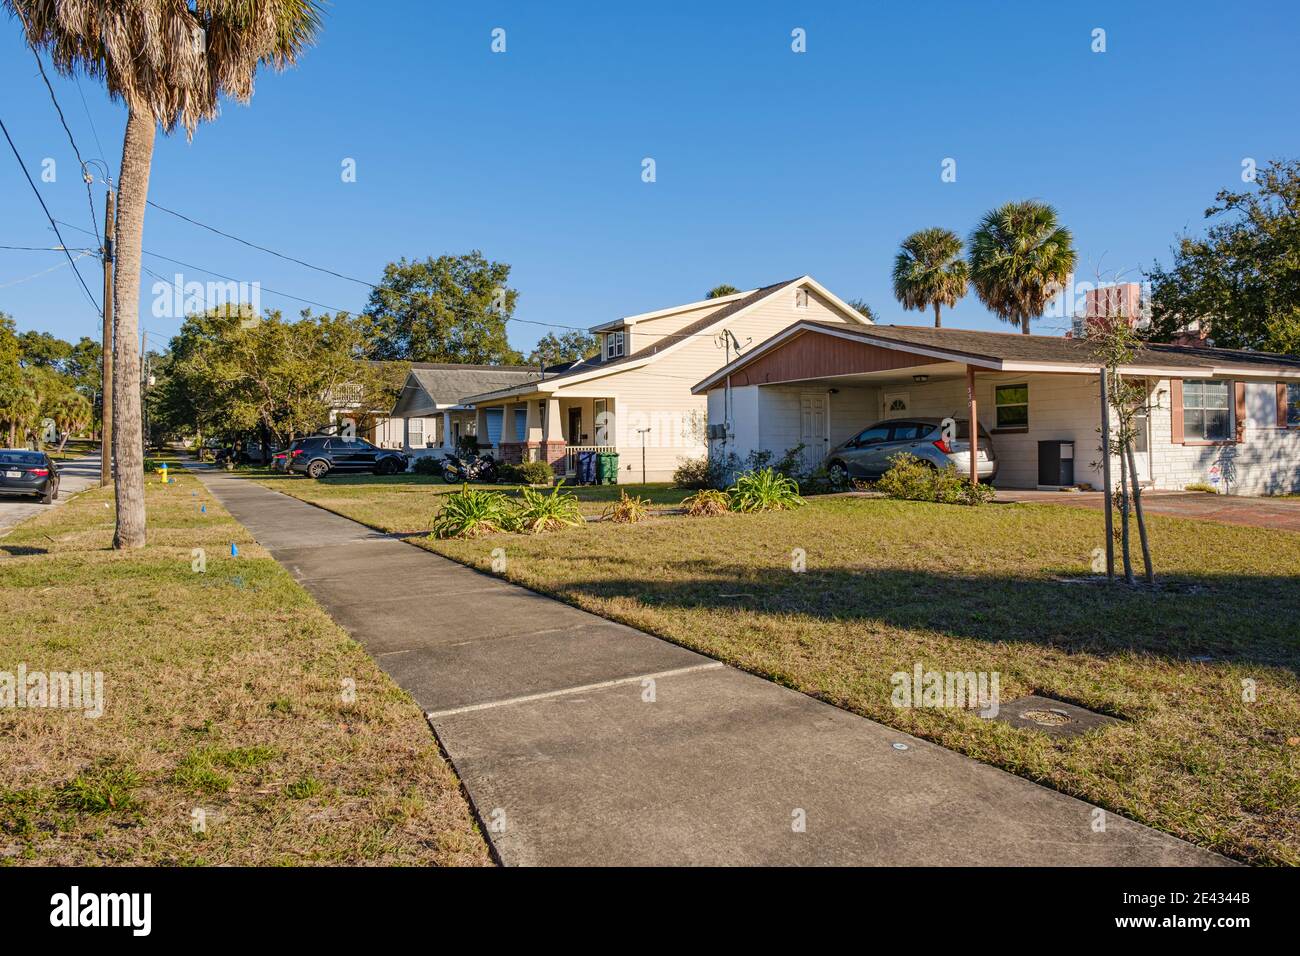 Existing homes in Tampa Heights, Tampa, Florida. Tampa suburb established in 1883. The Tampa Heights neighborhood has been experiencing gentrification. Stock Photo